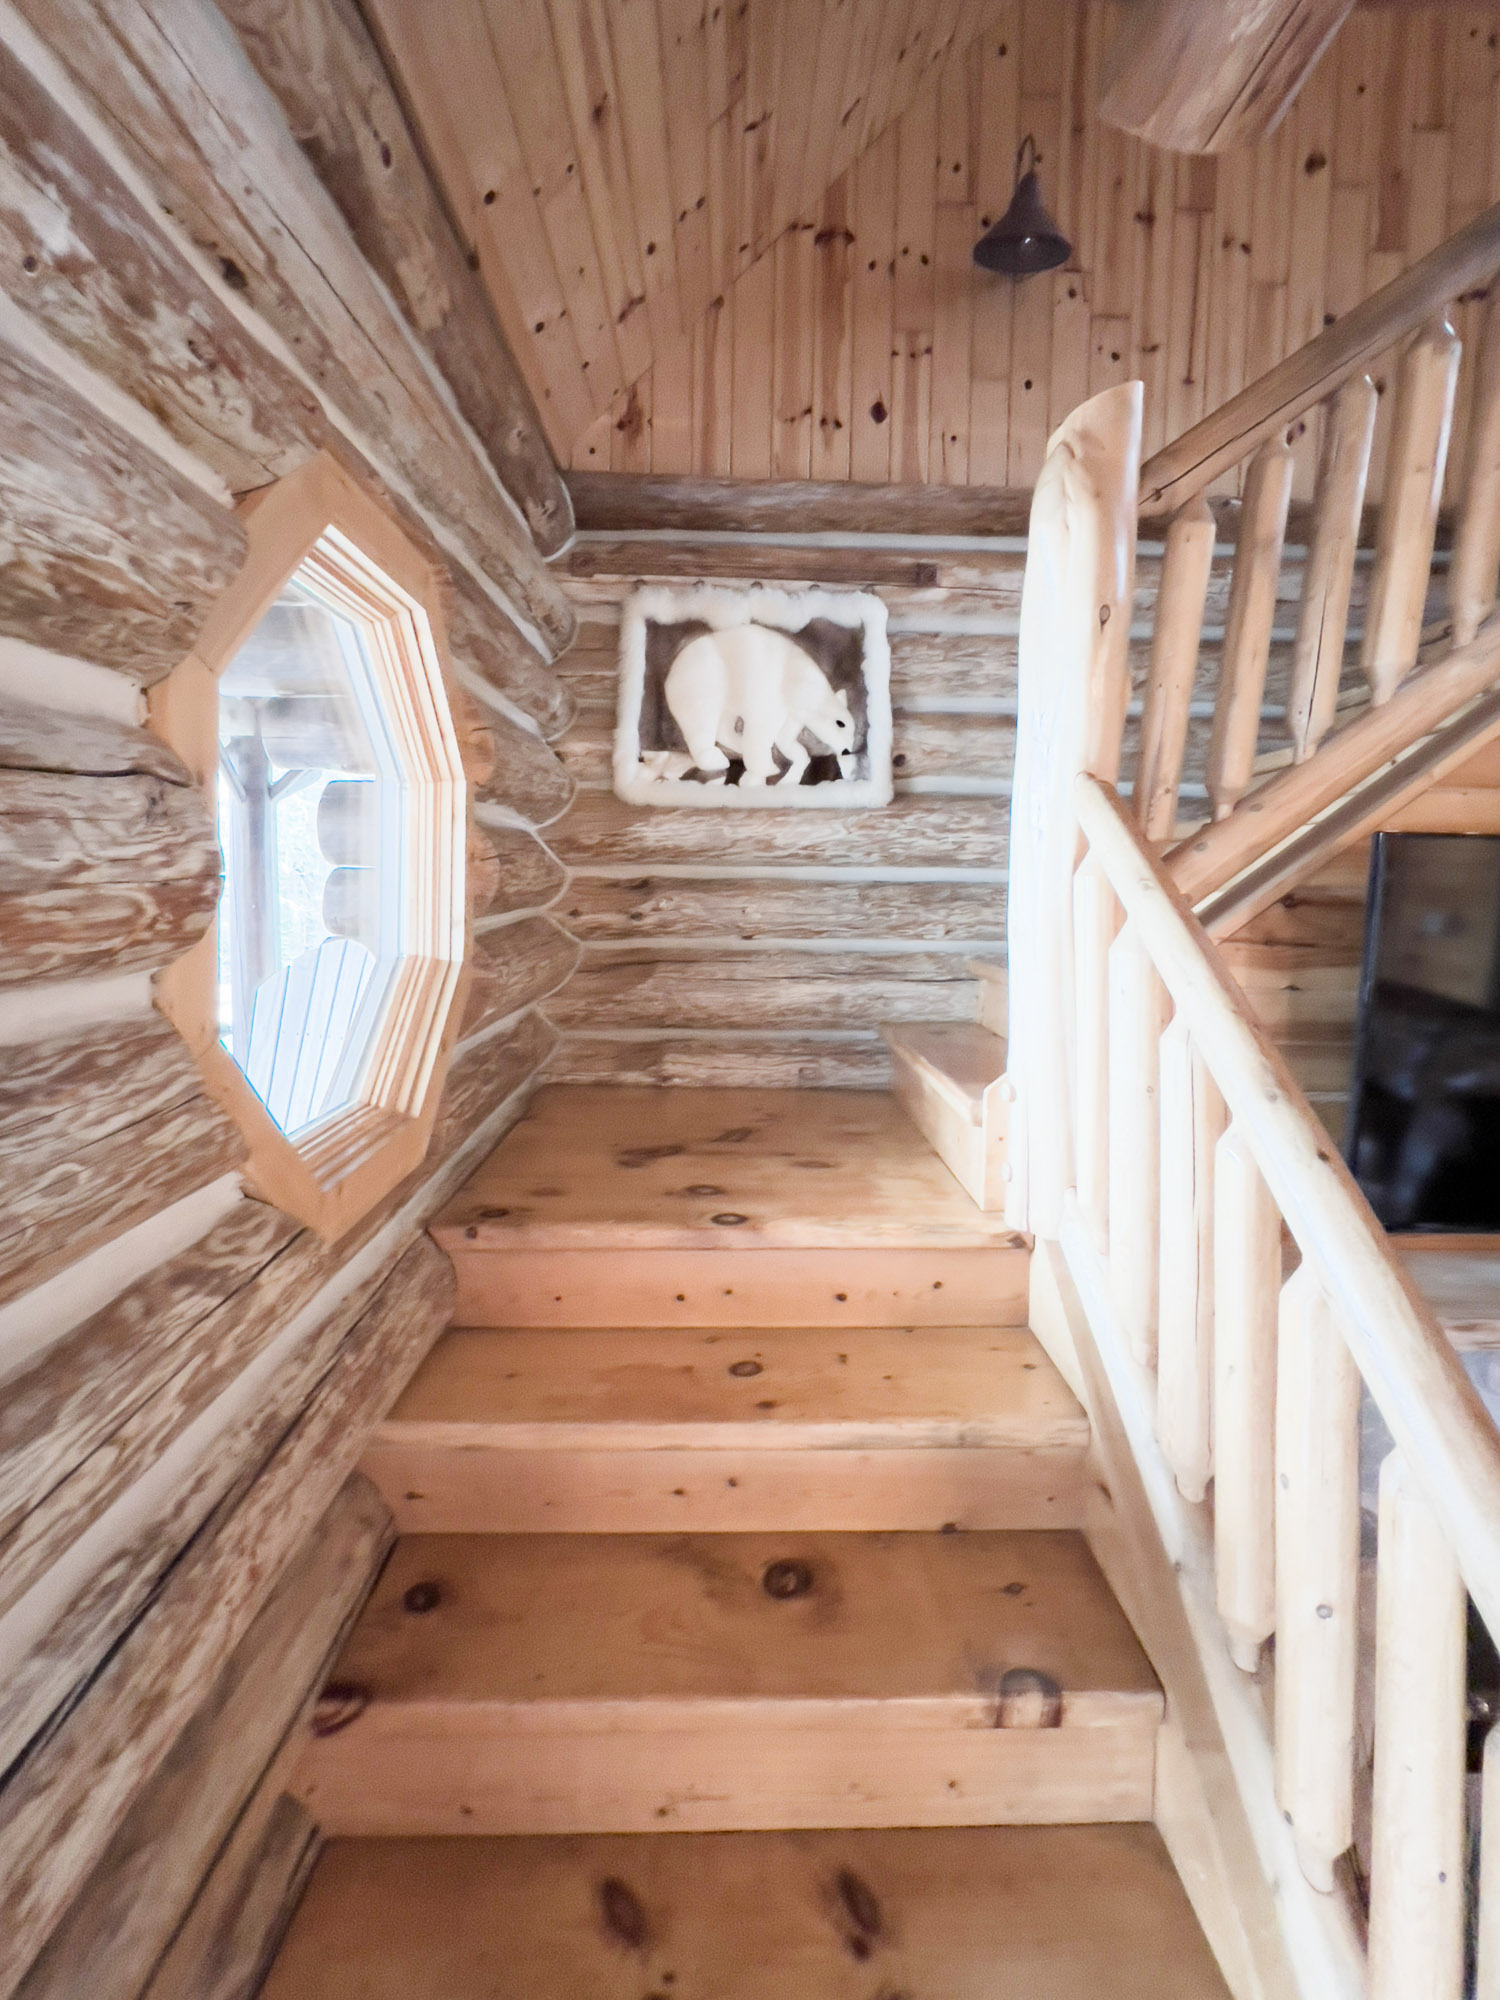 Stairwell of The Lodge at Sleeping Bear Resort